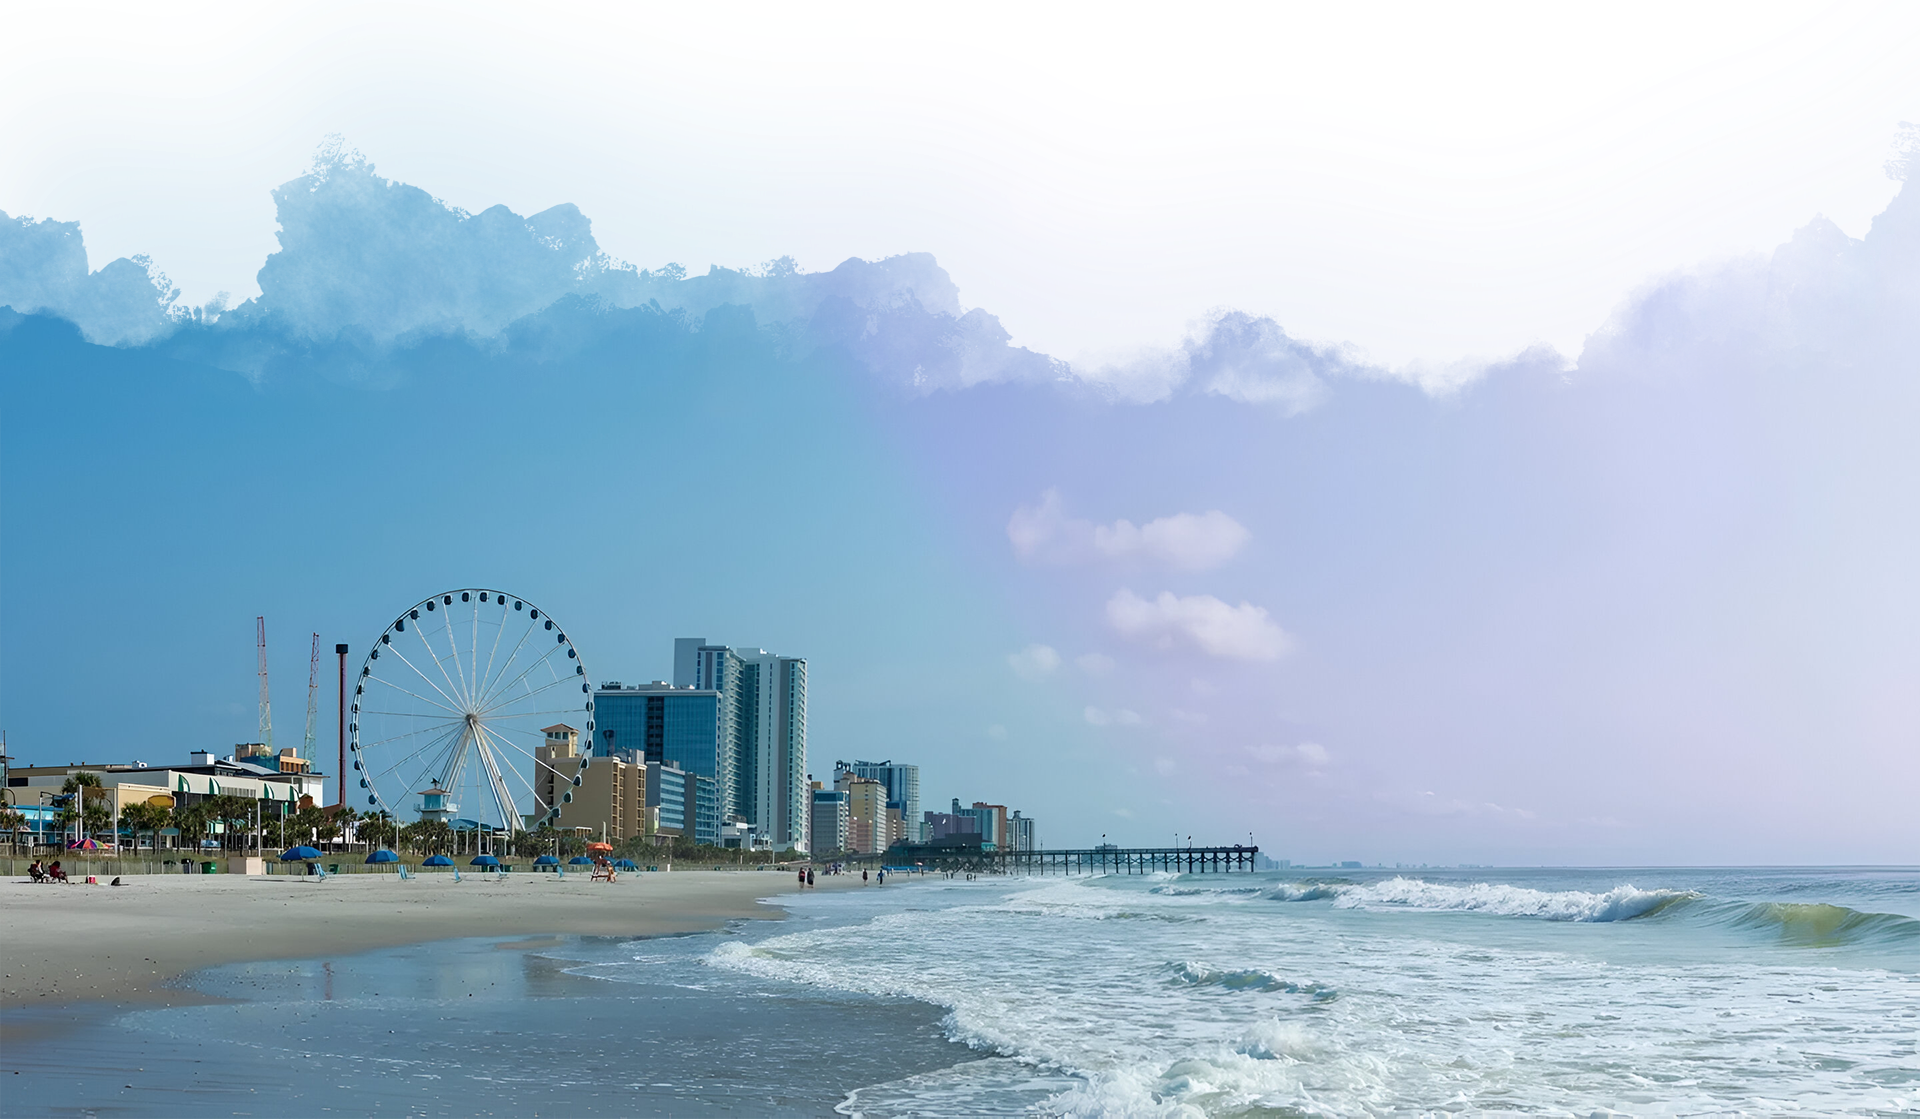 A beach with waves and buildings in the background.